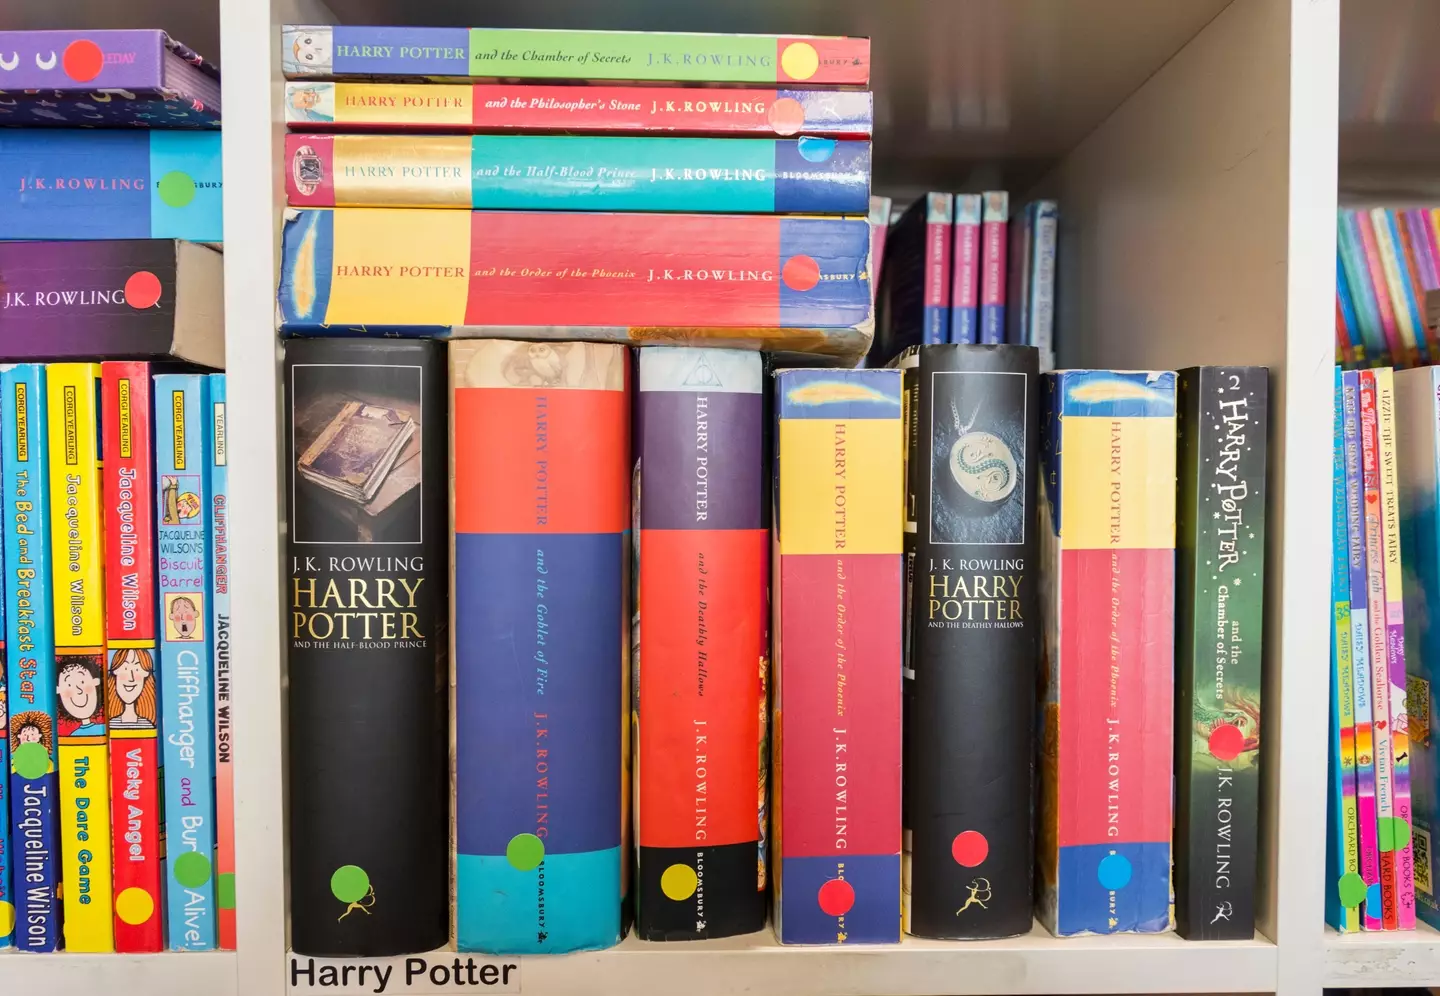 First editions of Harry Potter books can fetch good money (